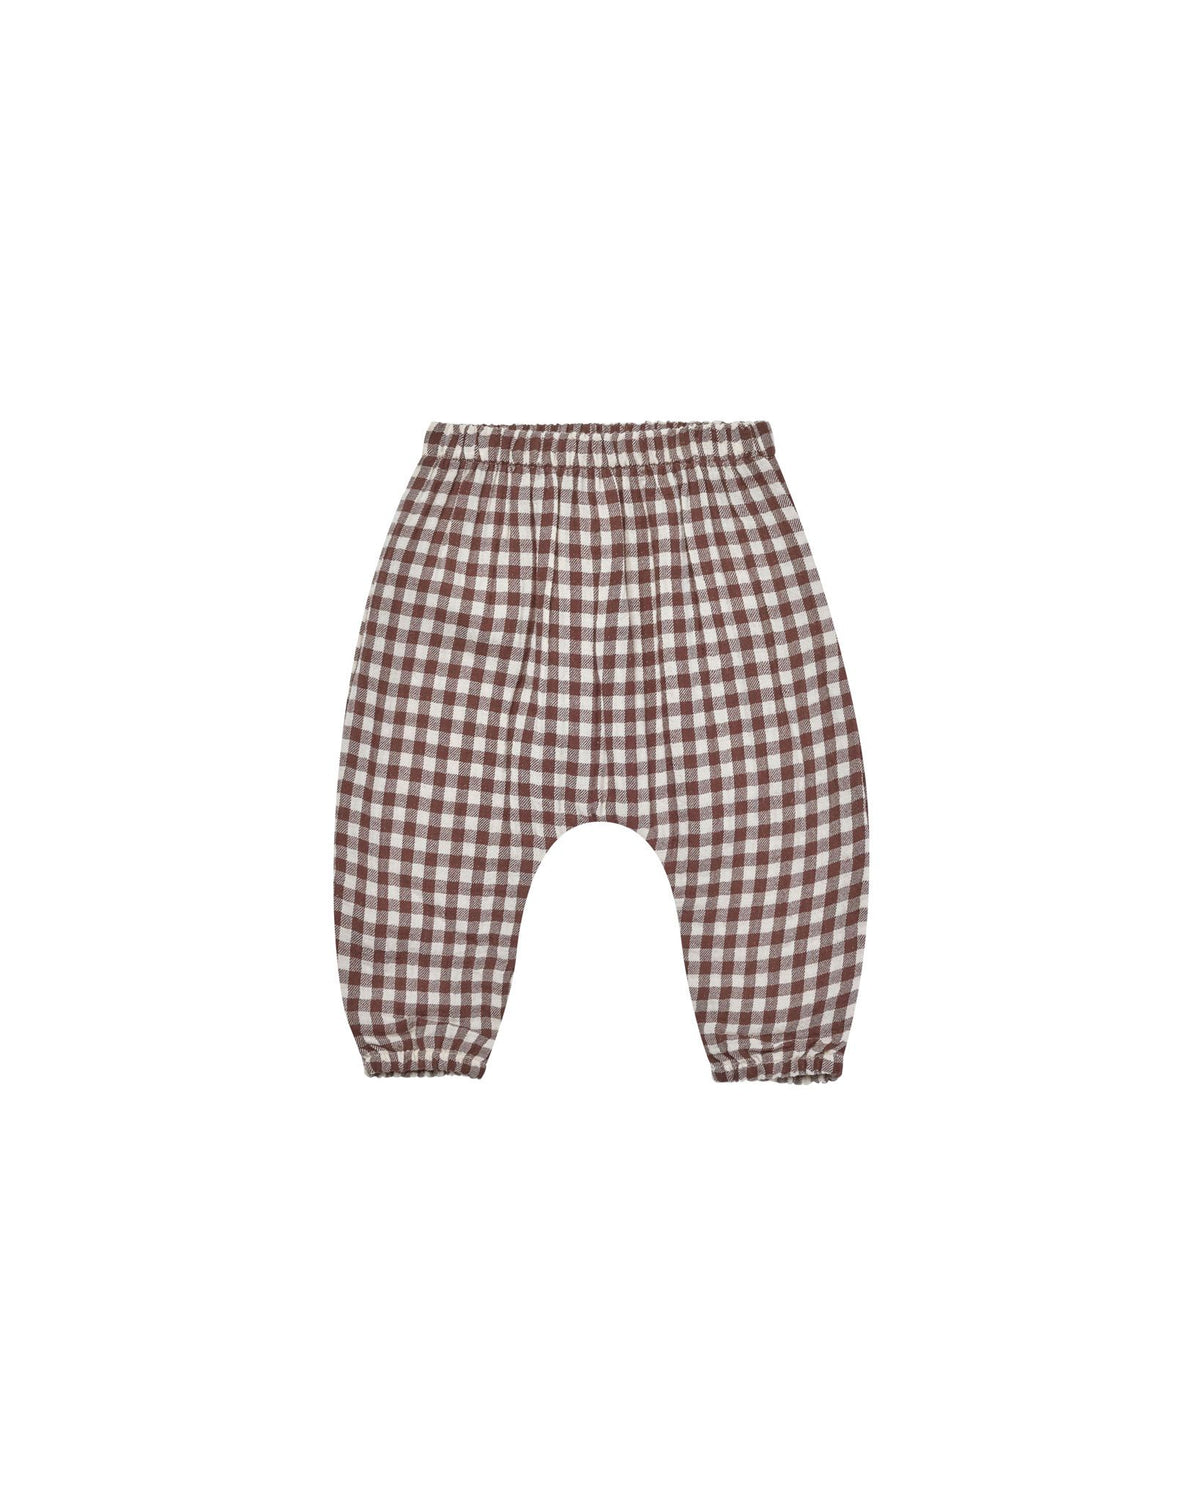 Woven Pant Gingham